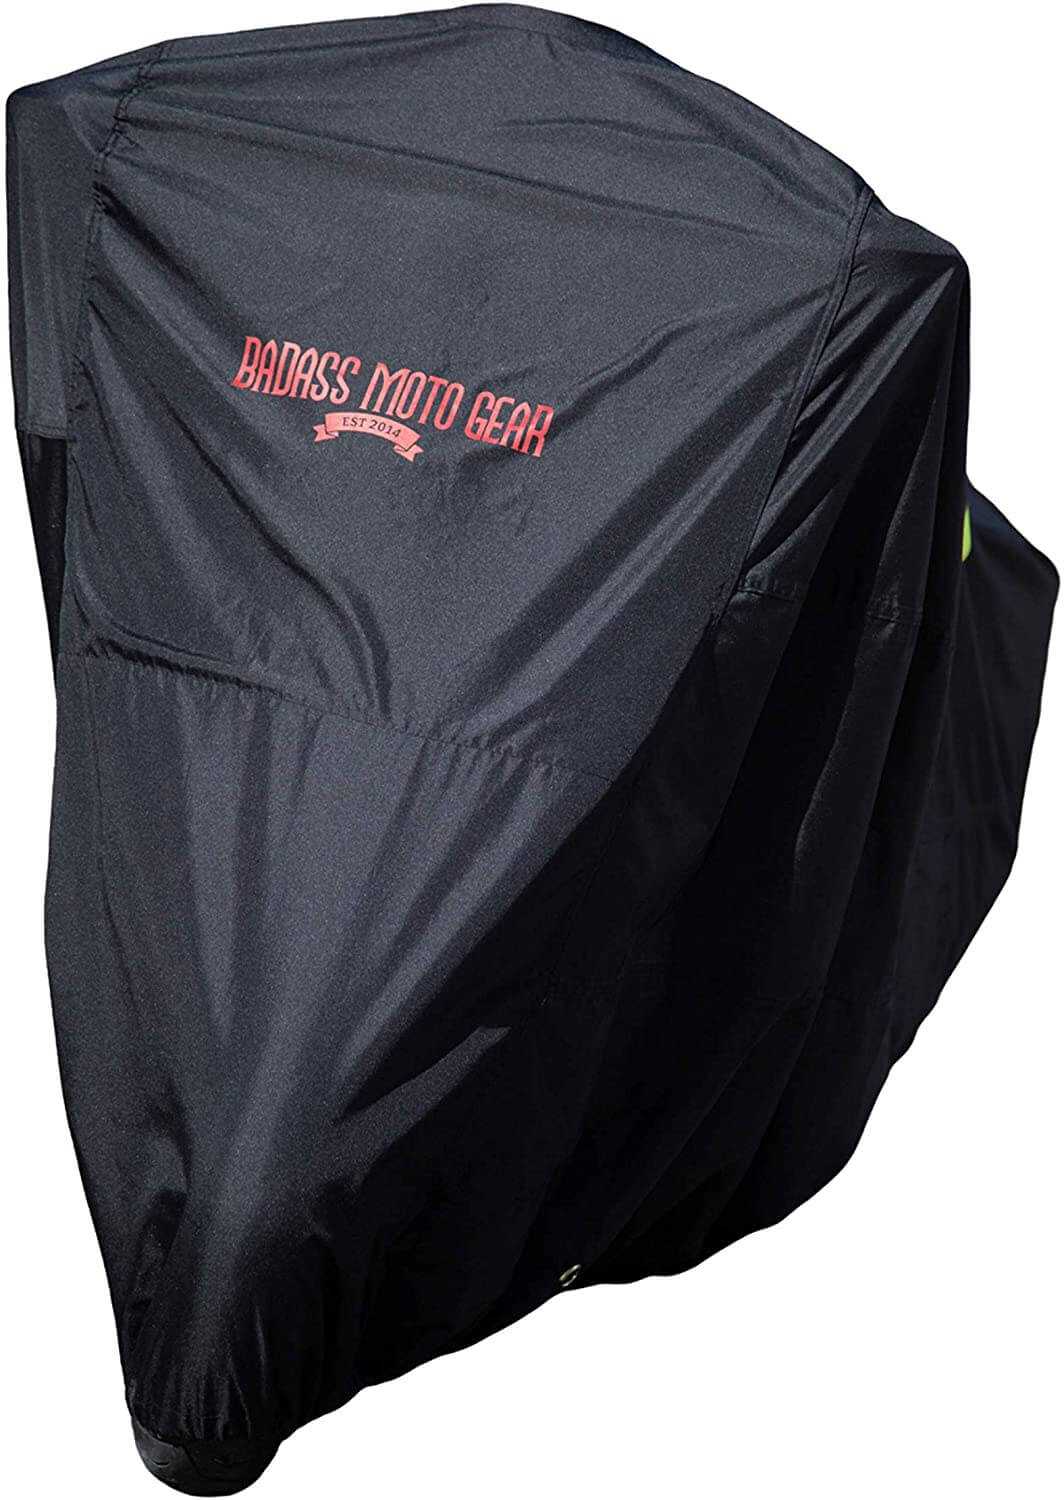 motorcycle_cover_badass_brand